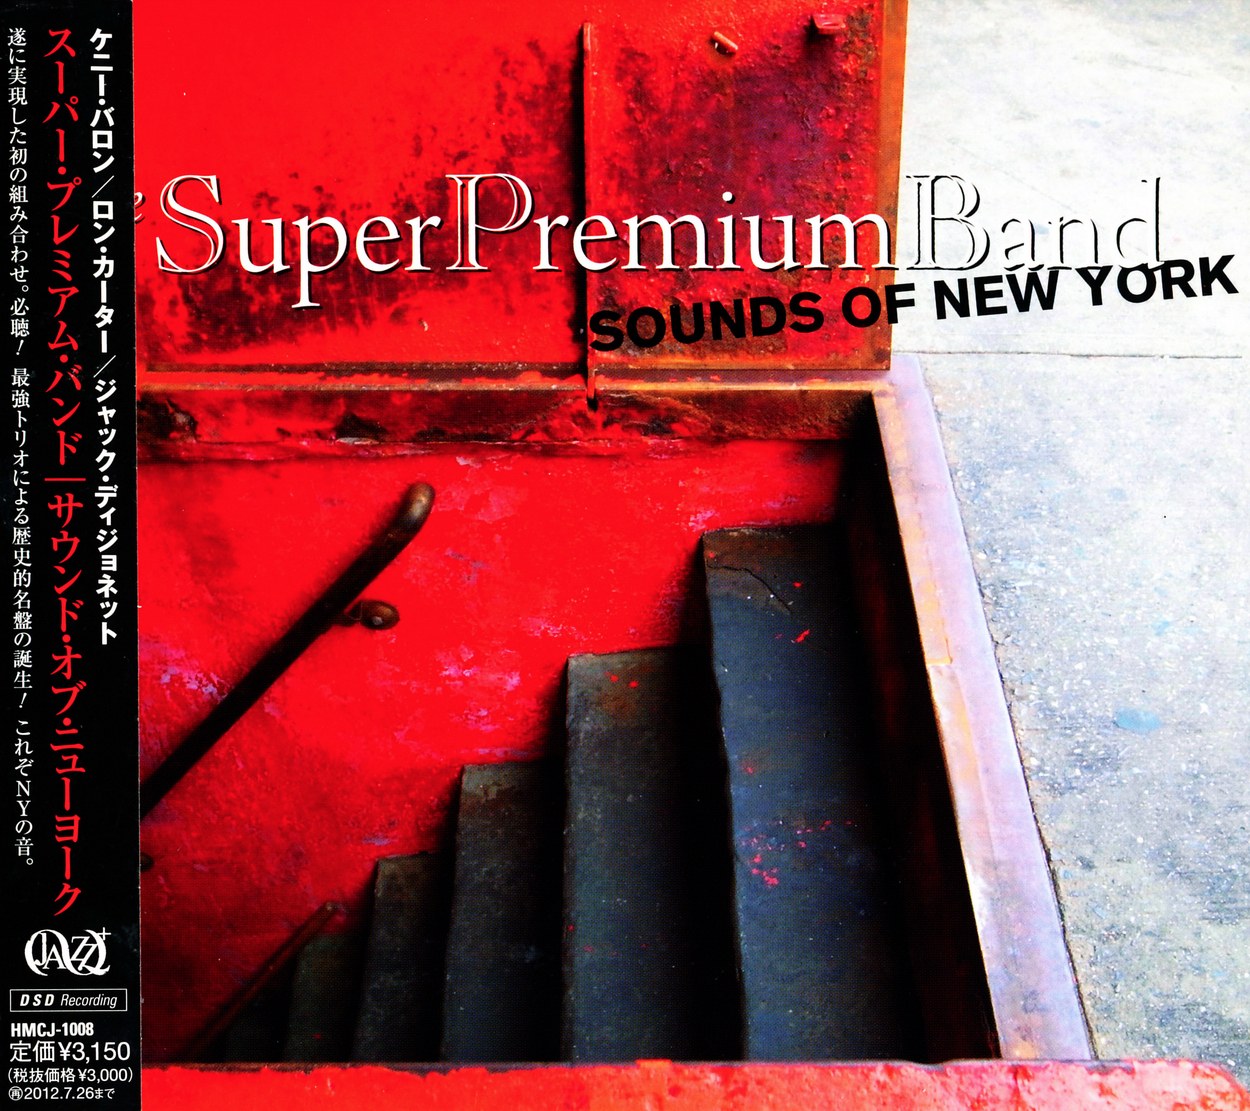 THE SUPER PREMIUM BAND - Sounds of New York cover 